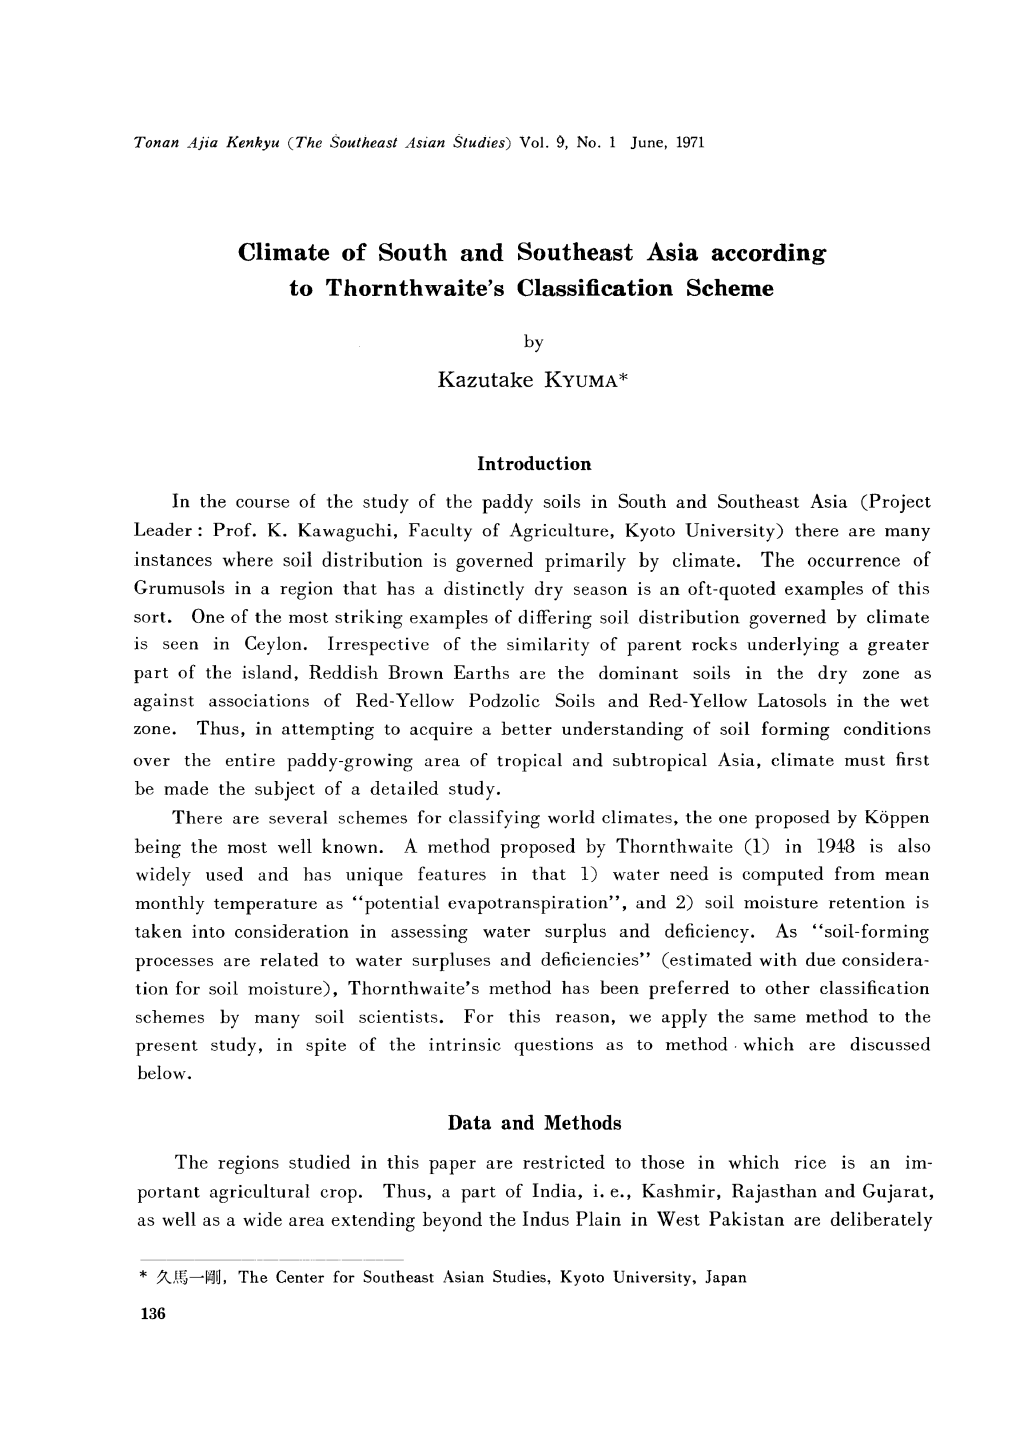 Climate of South and Southeast Asia According to Thornthwaite's Classification Scheme